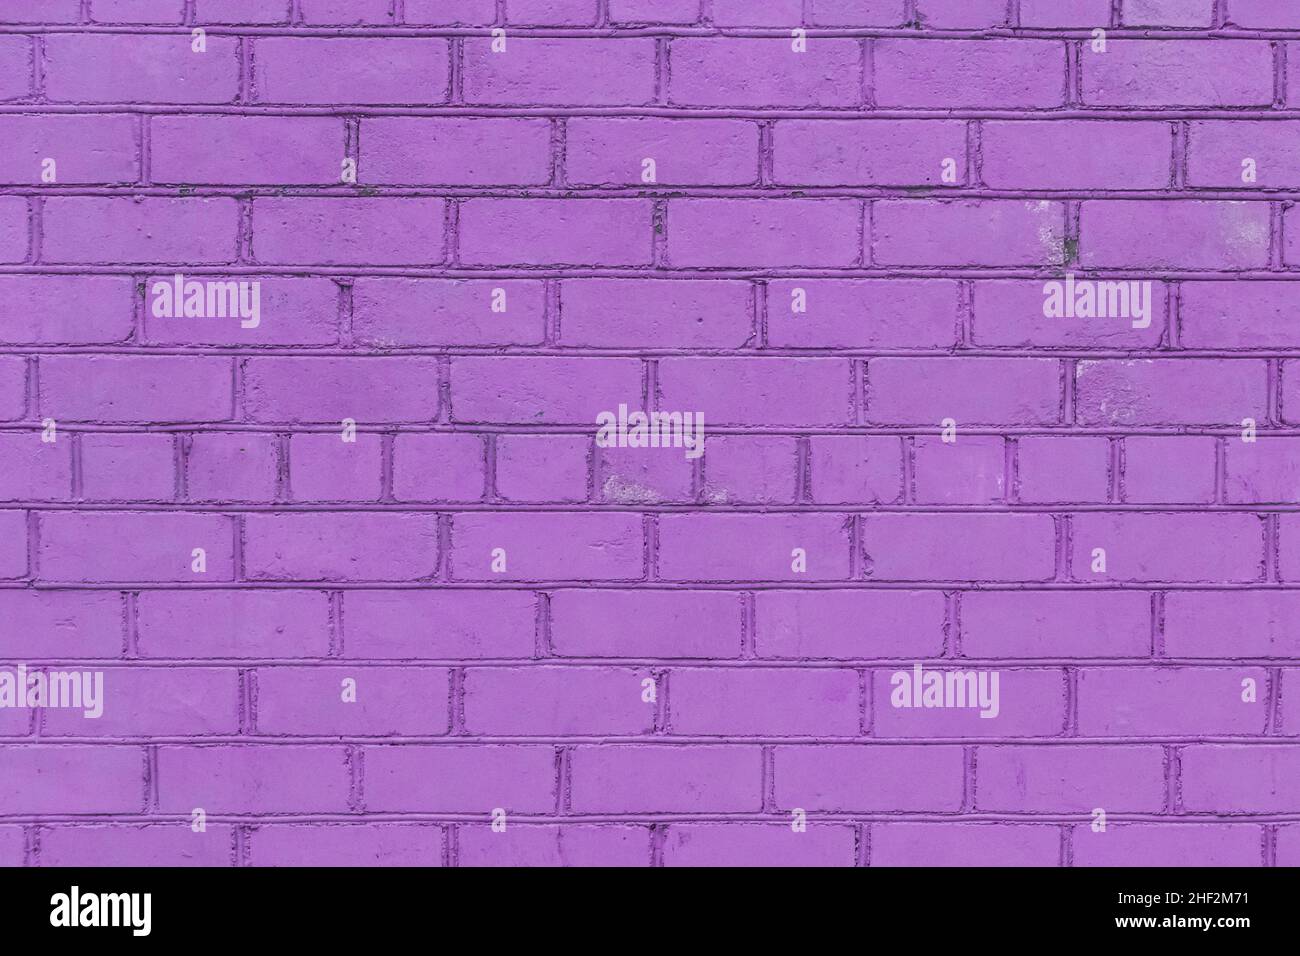 Painted brick wall in pink purple paint texture stone background. Stock Photo